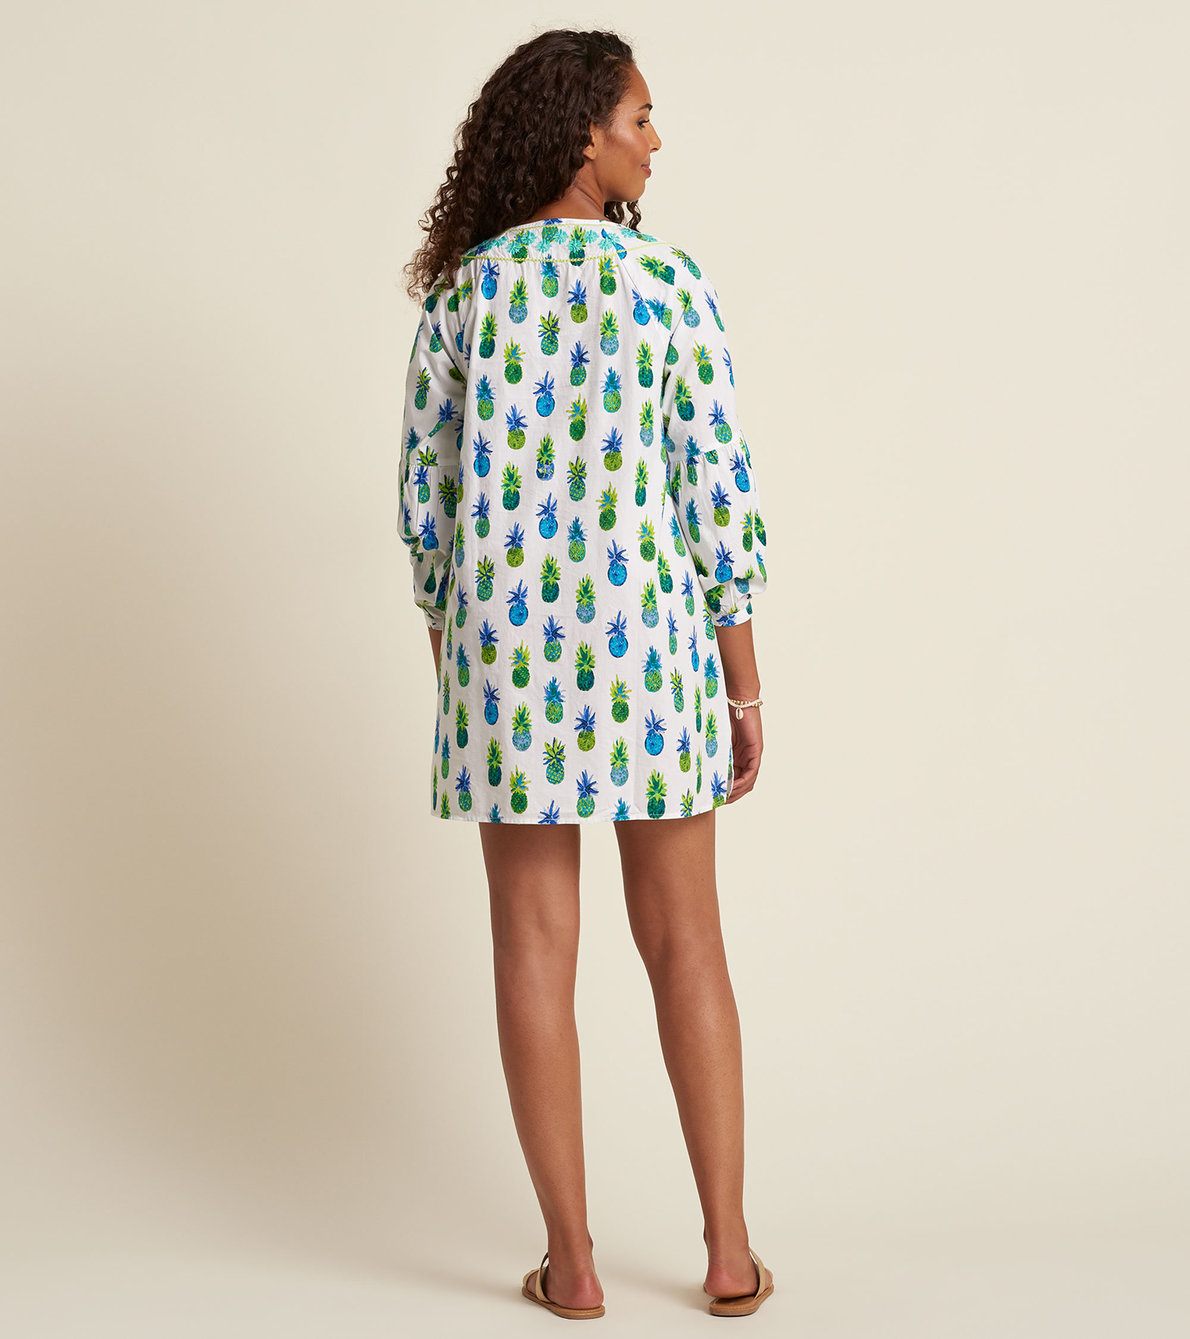 View larger image of Delray Tunic - Painted Pineapples